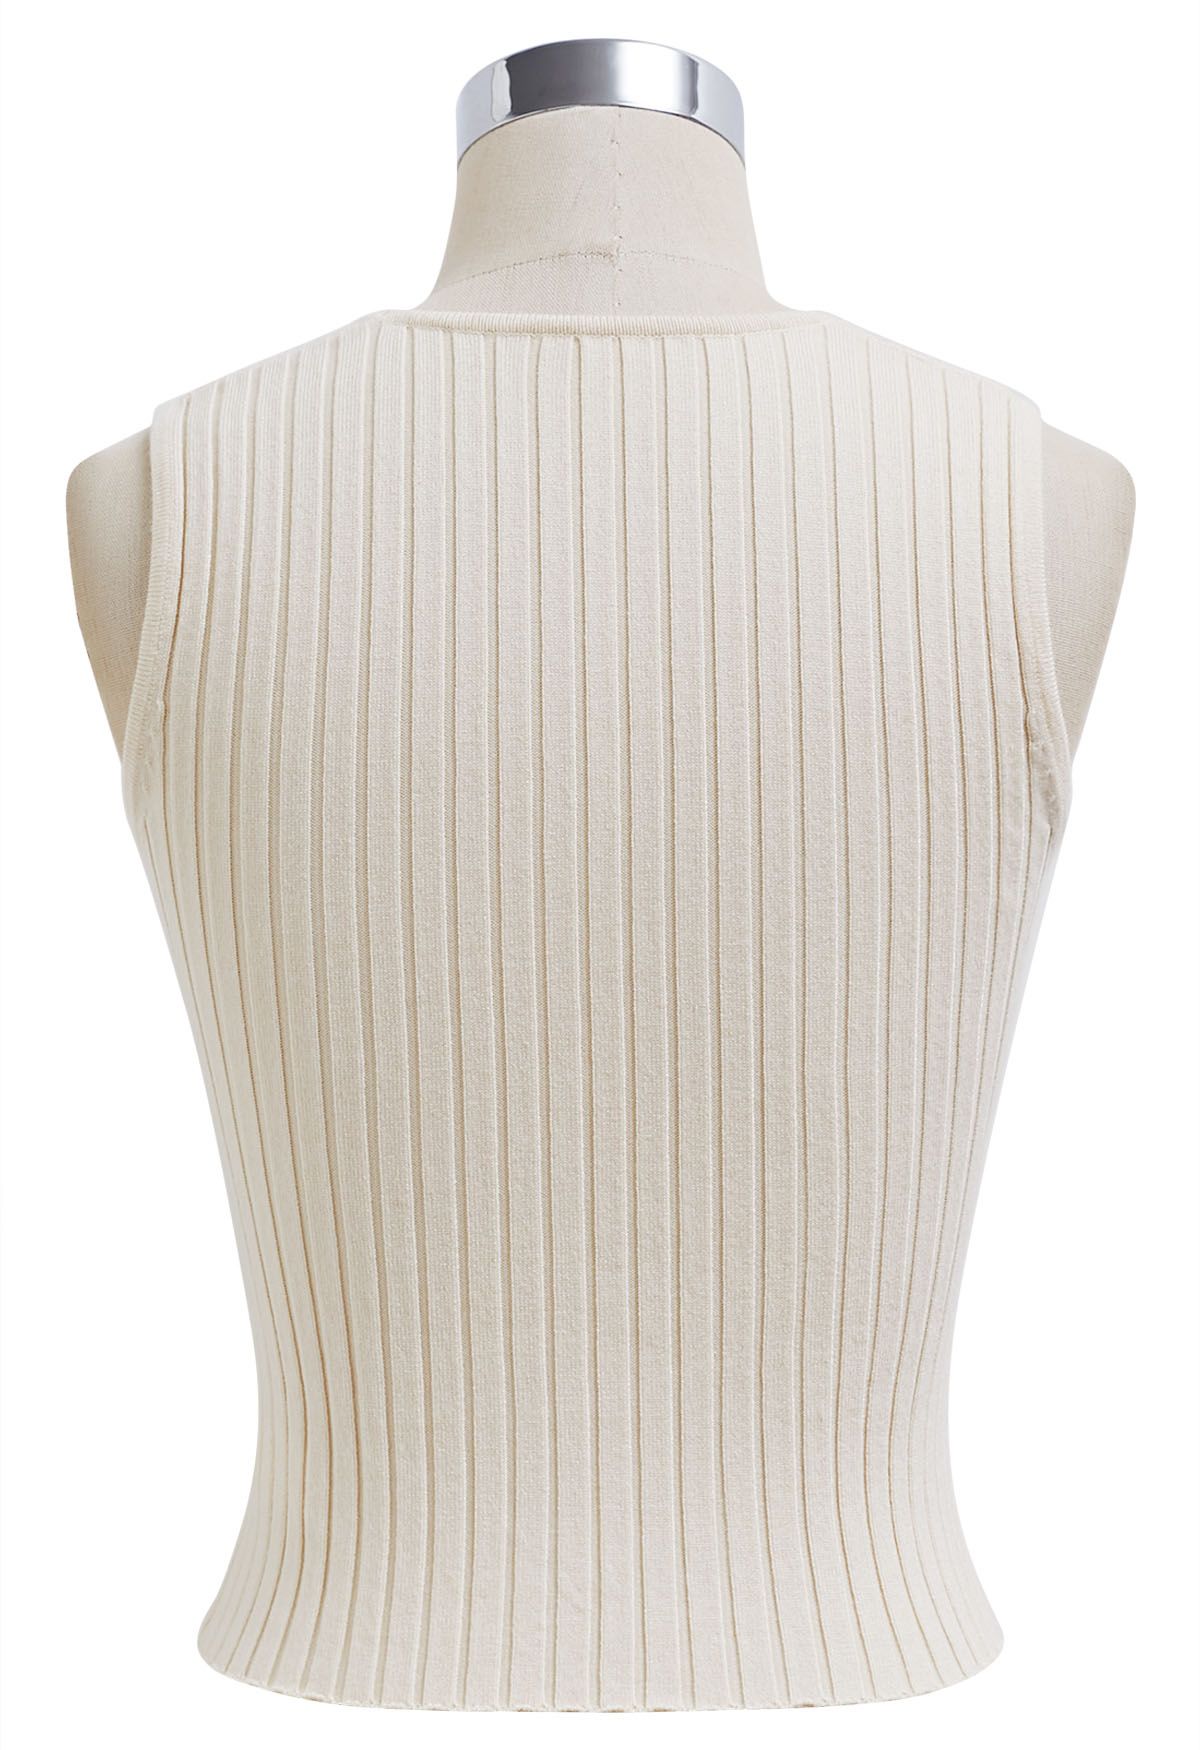 Flattering Fit Ribbed Tank Top in Ivory